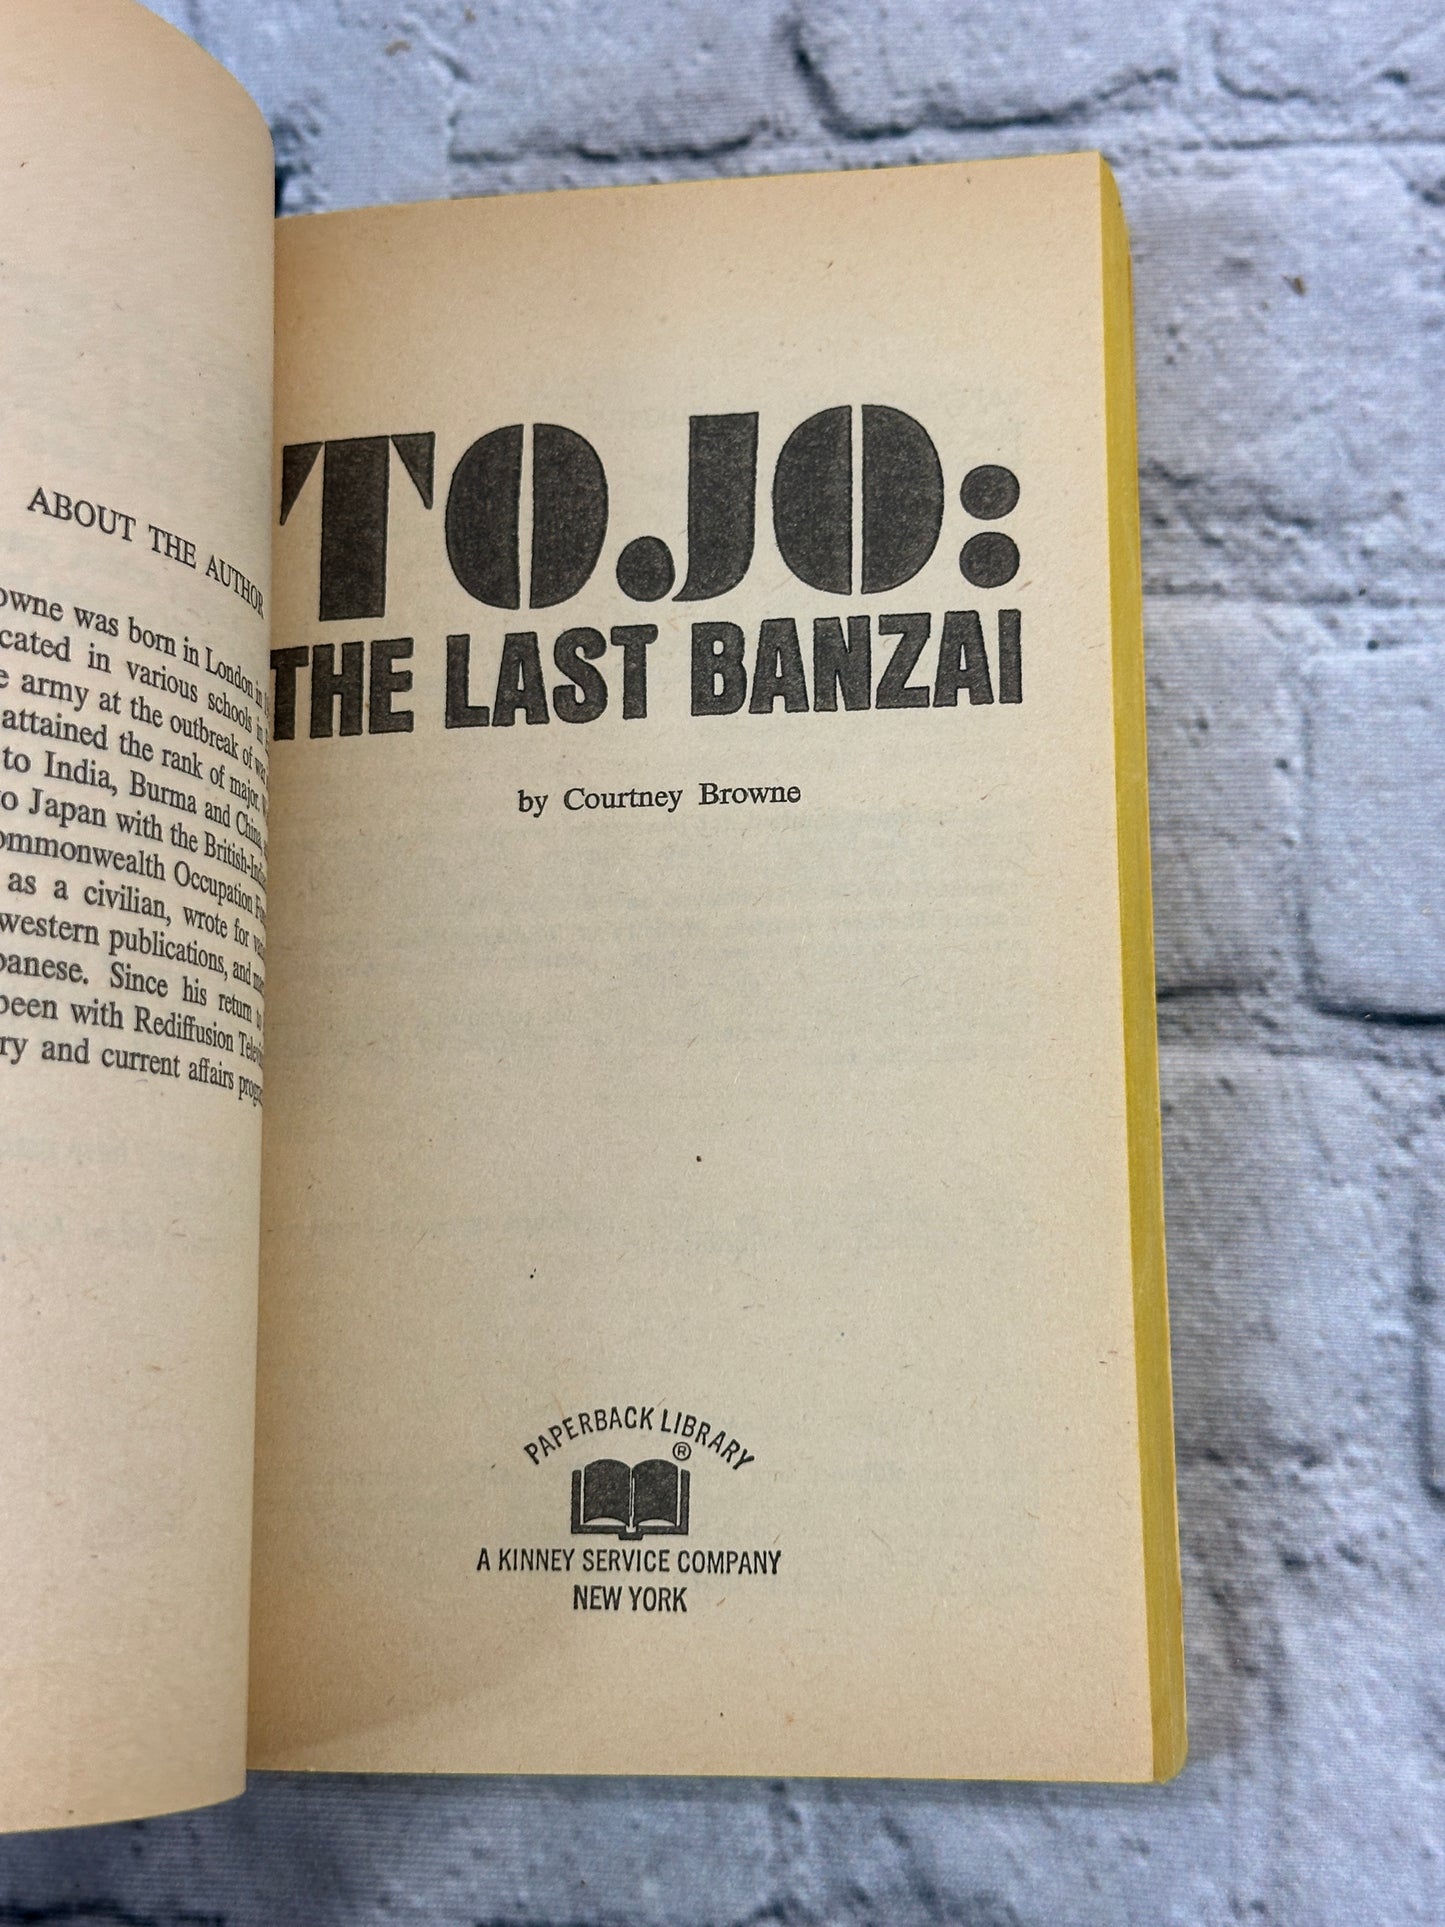 Tojo: The Last Banzai by Courtney Browne [1972 · A Paperback Library Edition]